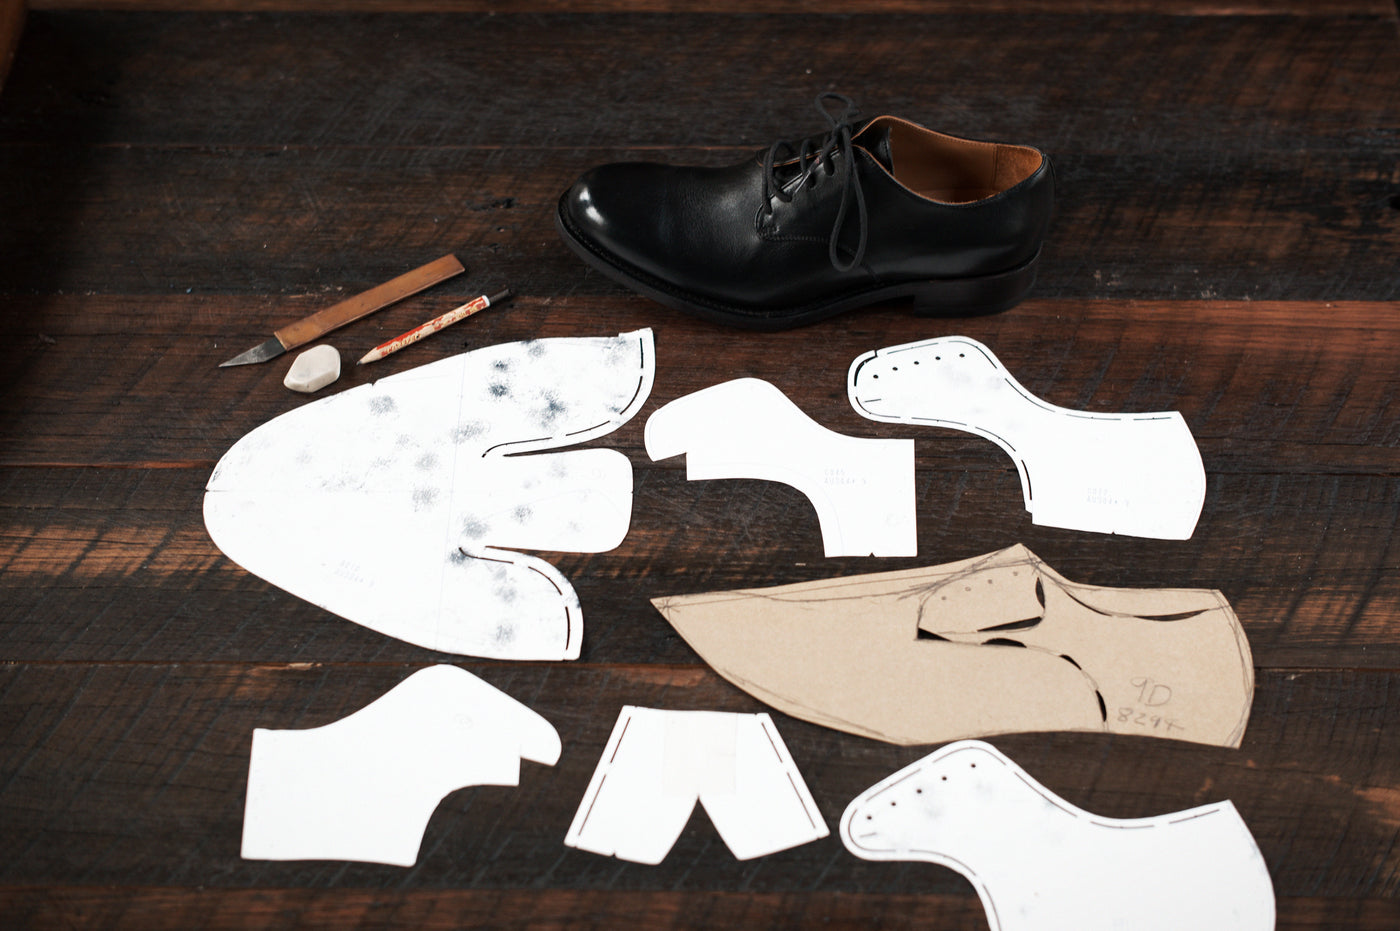 Step by step guide: Patternmaking | Andrew McDonald Shoemaker – A. McDonald  Shoemaker